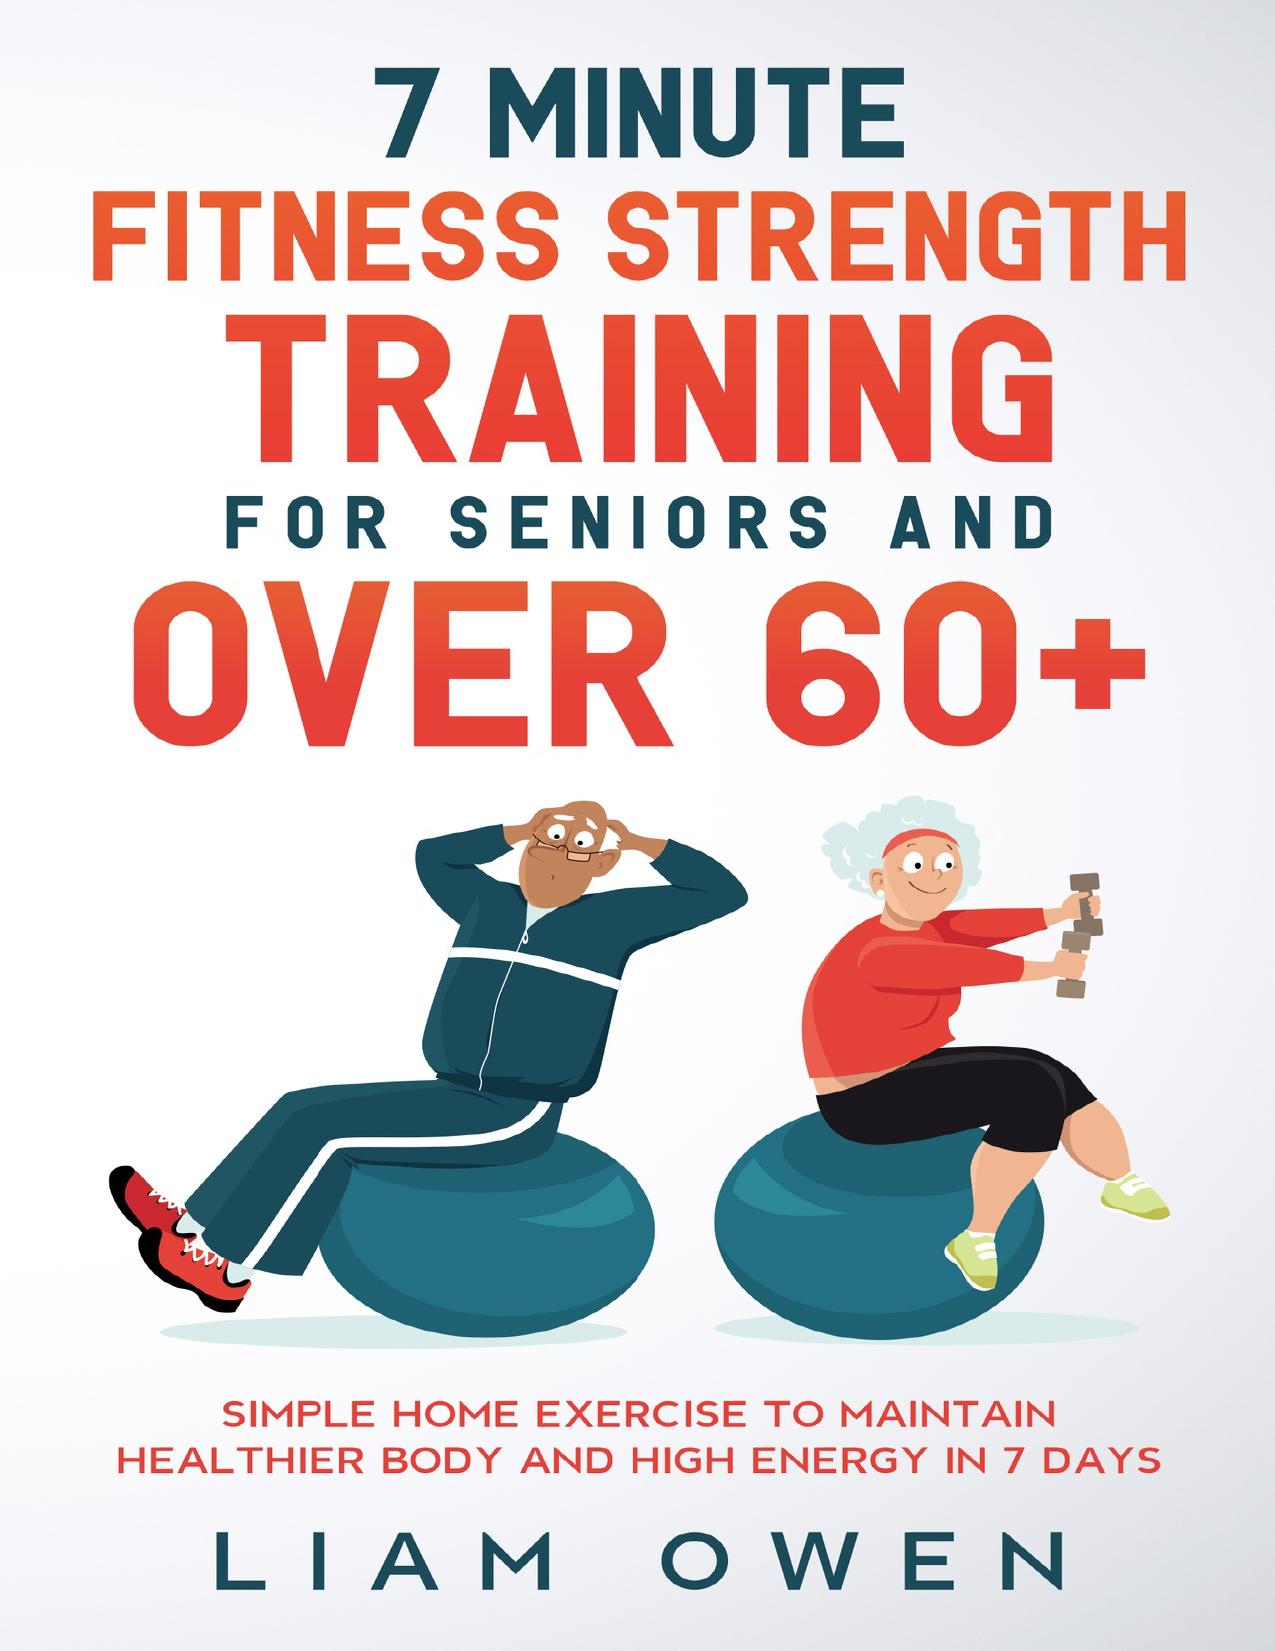 7 Minute Fitness Strength Training for Seniors and Over 60+: Simple Home Exercise to Maintain Healthier Body and High Energy in 7 Days by Owen Liam